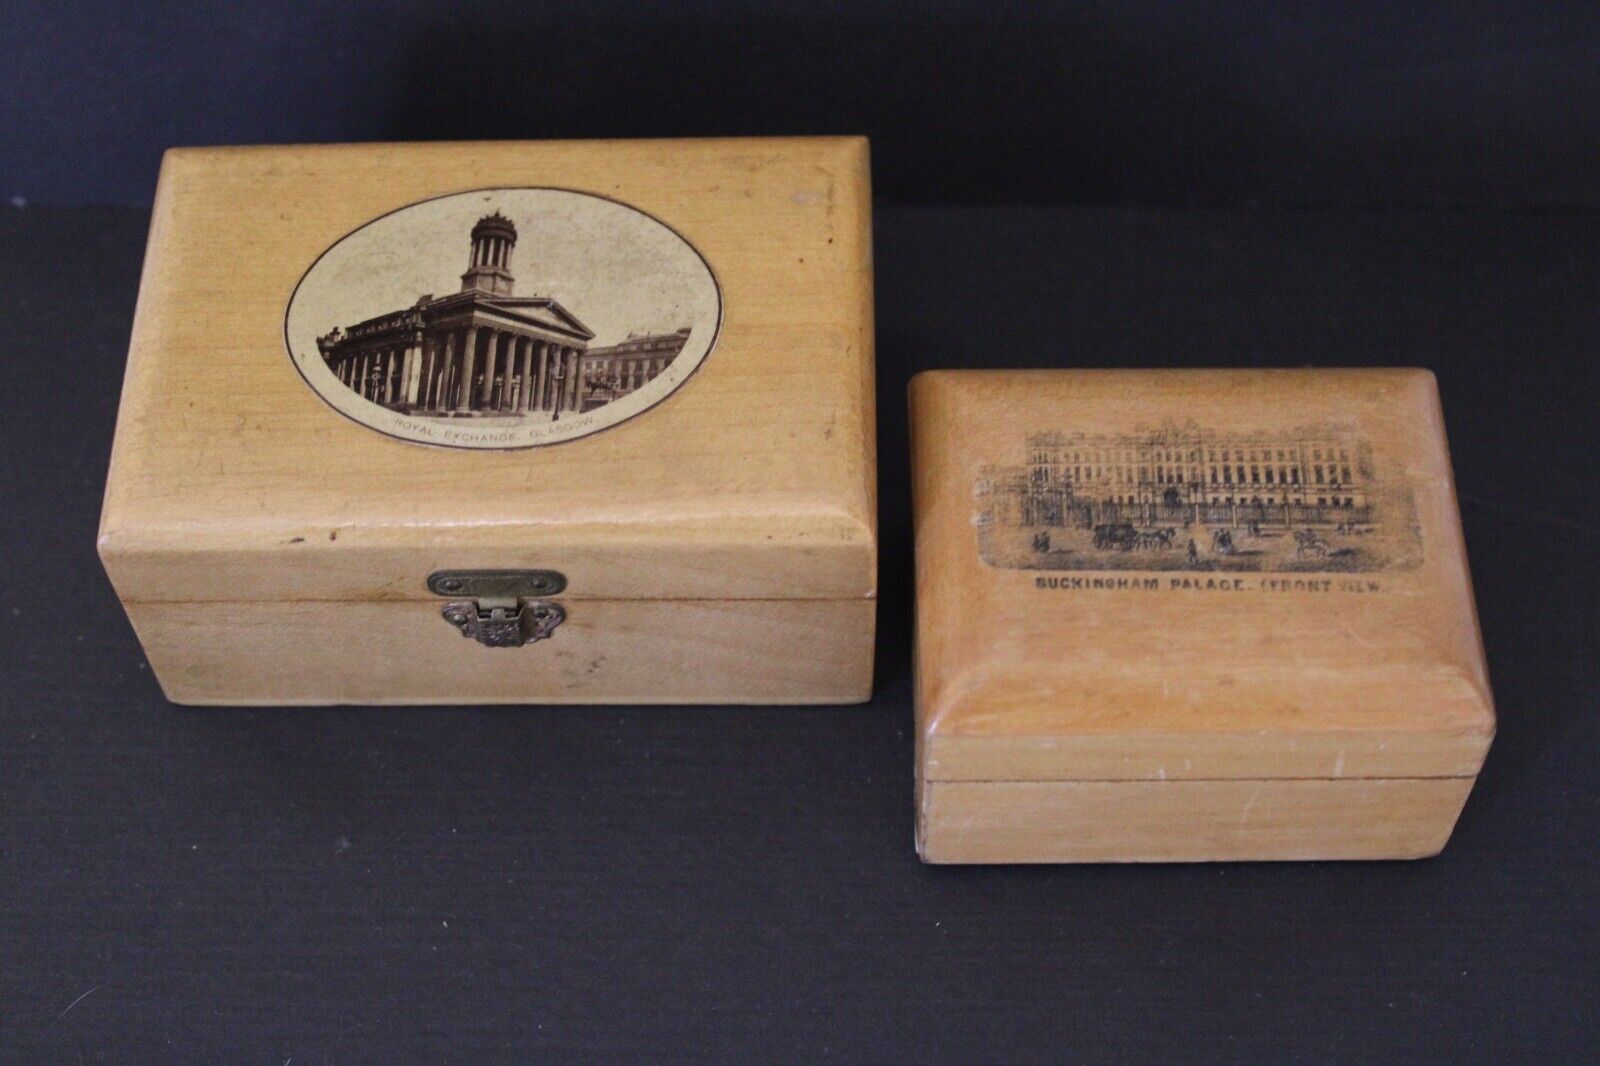 ANTIQUE Lot of 2 Mauchline Ware Boxes Transfer Image Buckingham Palace + 1